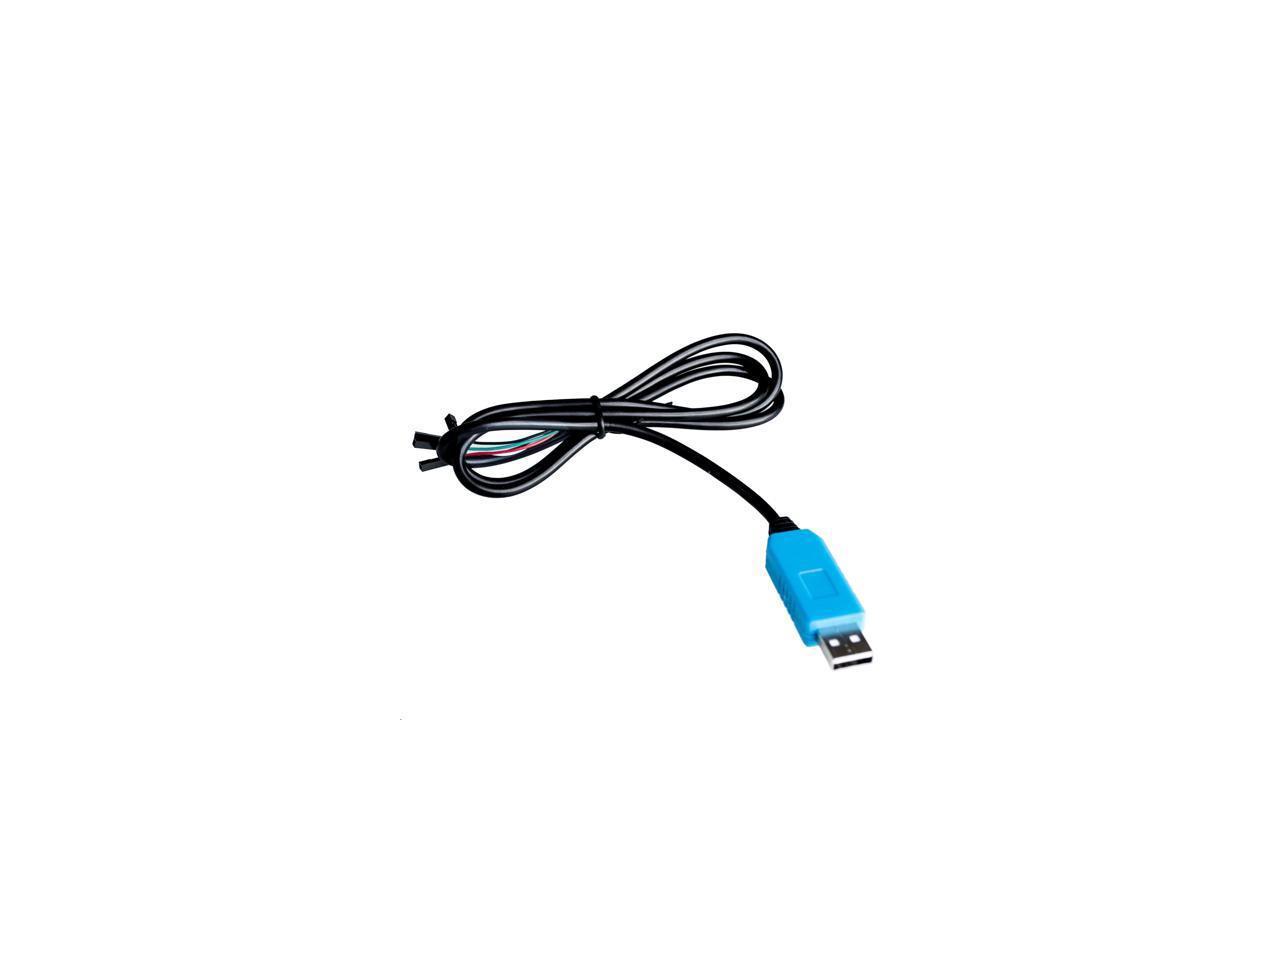 PL2303TA USB to TTL RS232 4 Pin Serial Converter Cable for Win 7/8/8.1 Universal